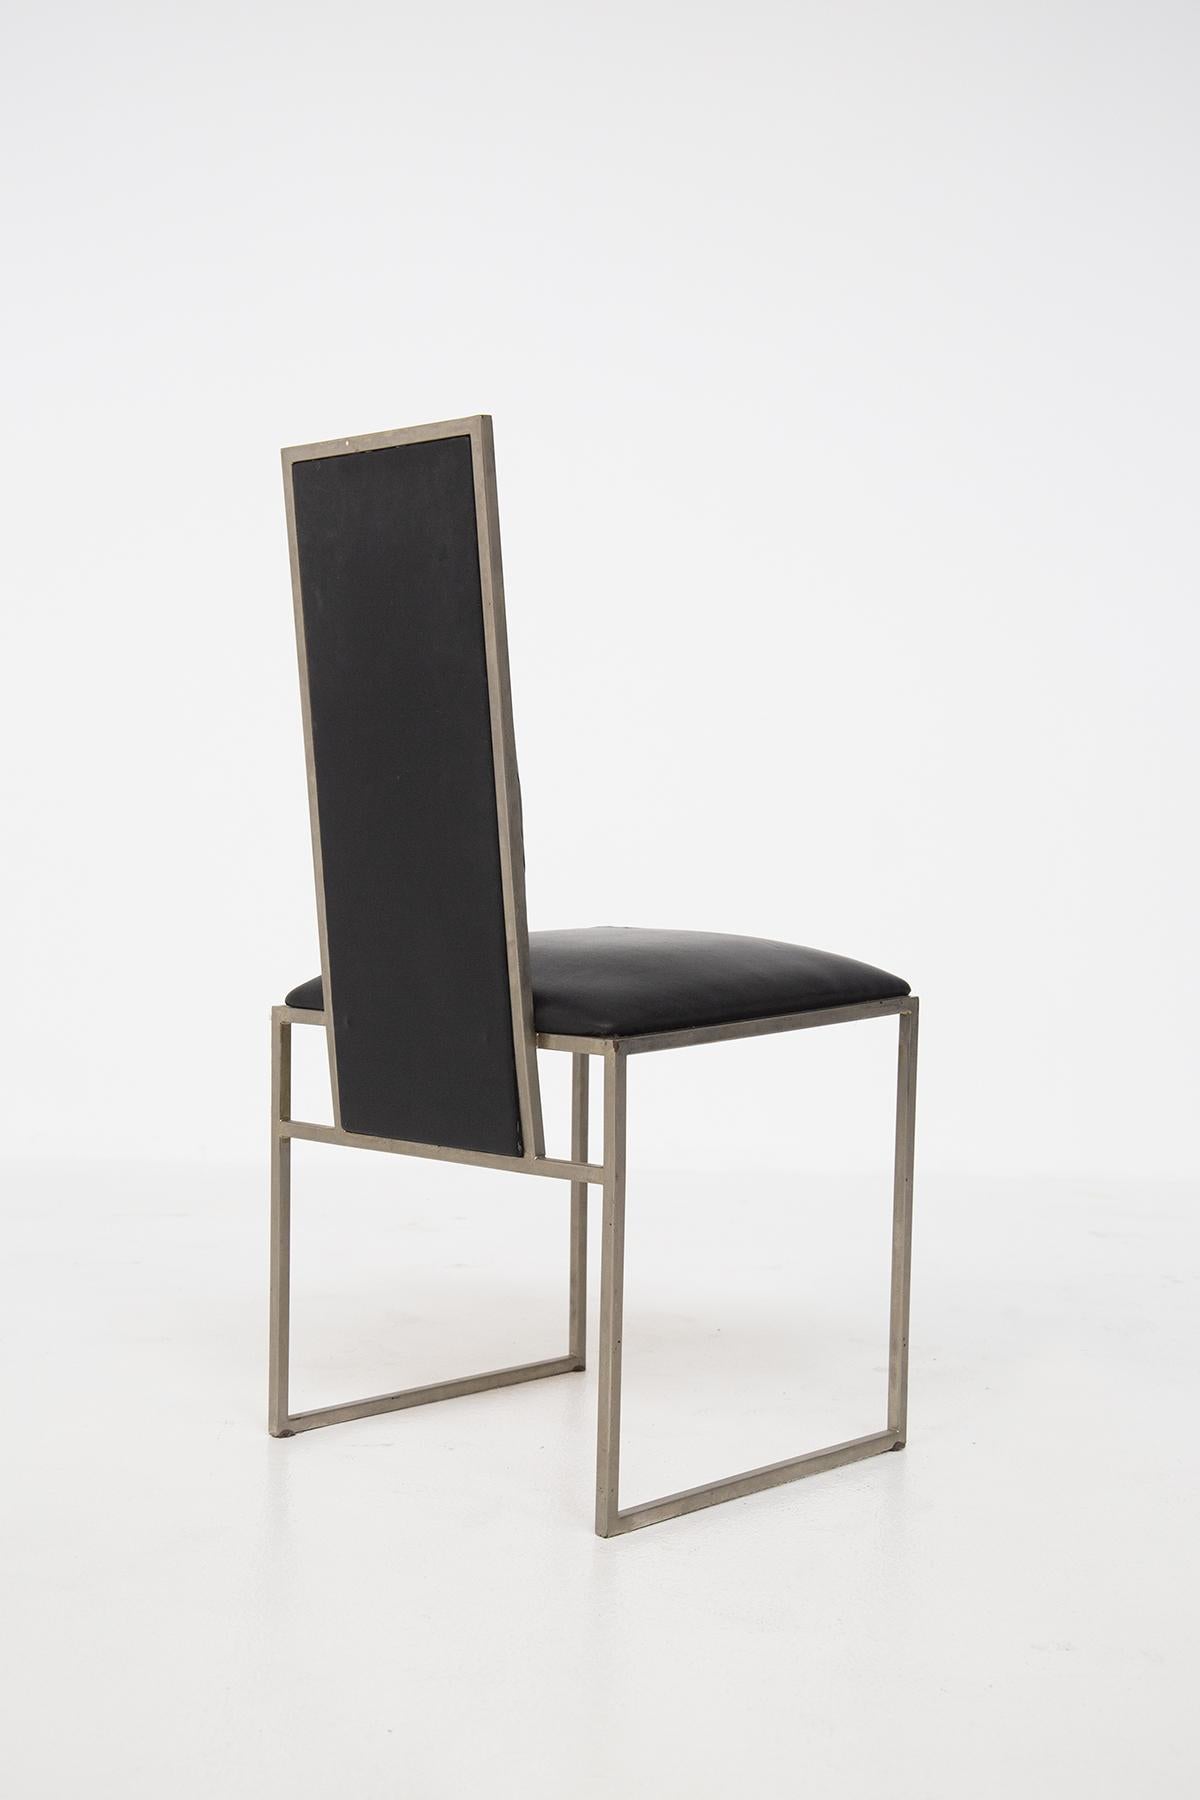 Romeo Rega Set of Six Dining Chair in Black Leather and Steel 4